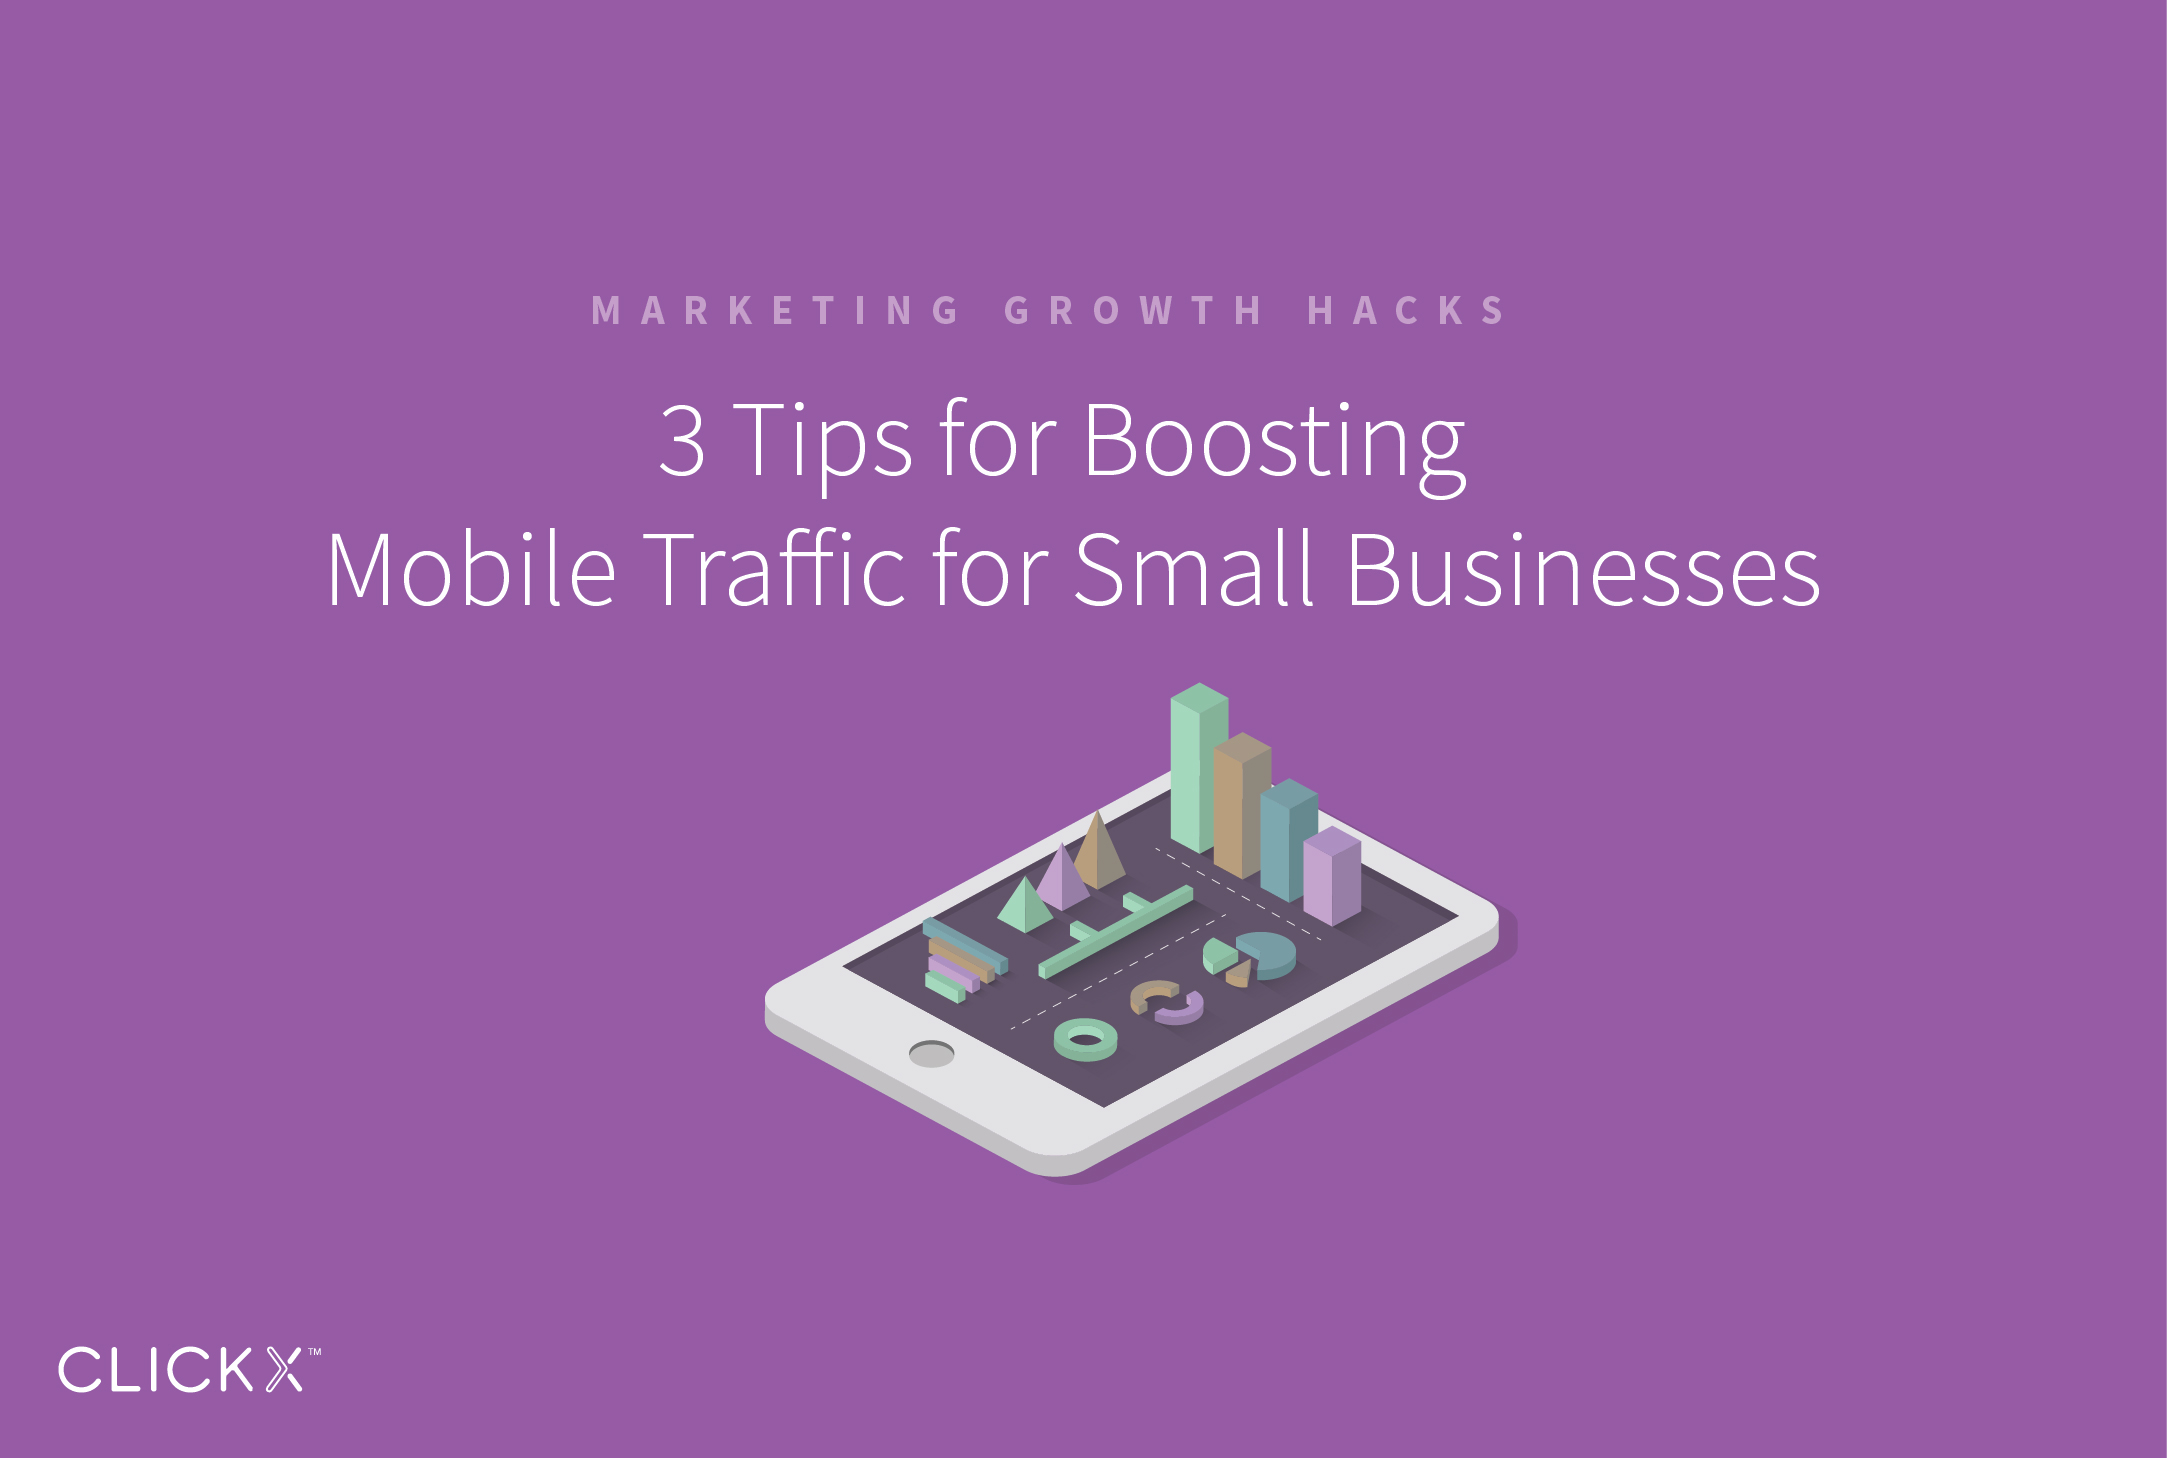 3 Tips for Boosting Mobile Traffic for Small Businesses